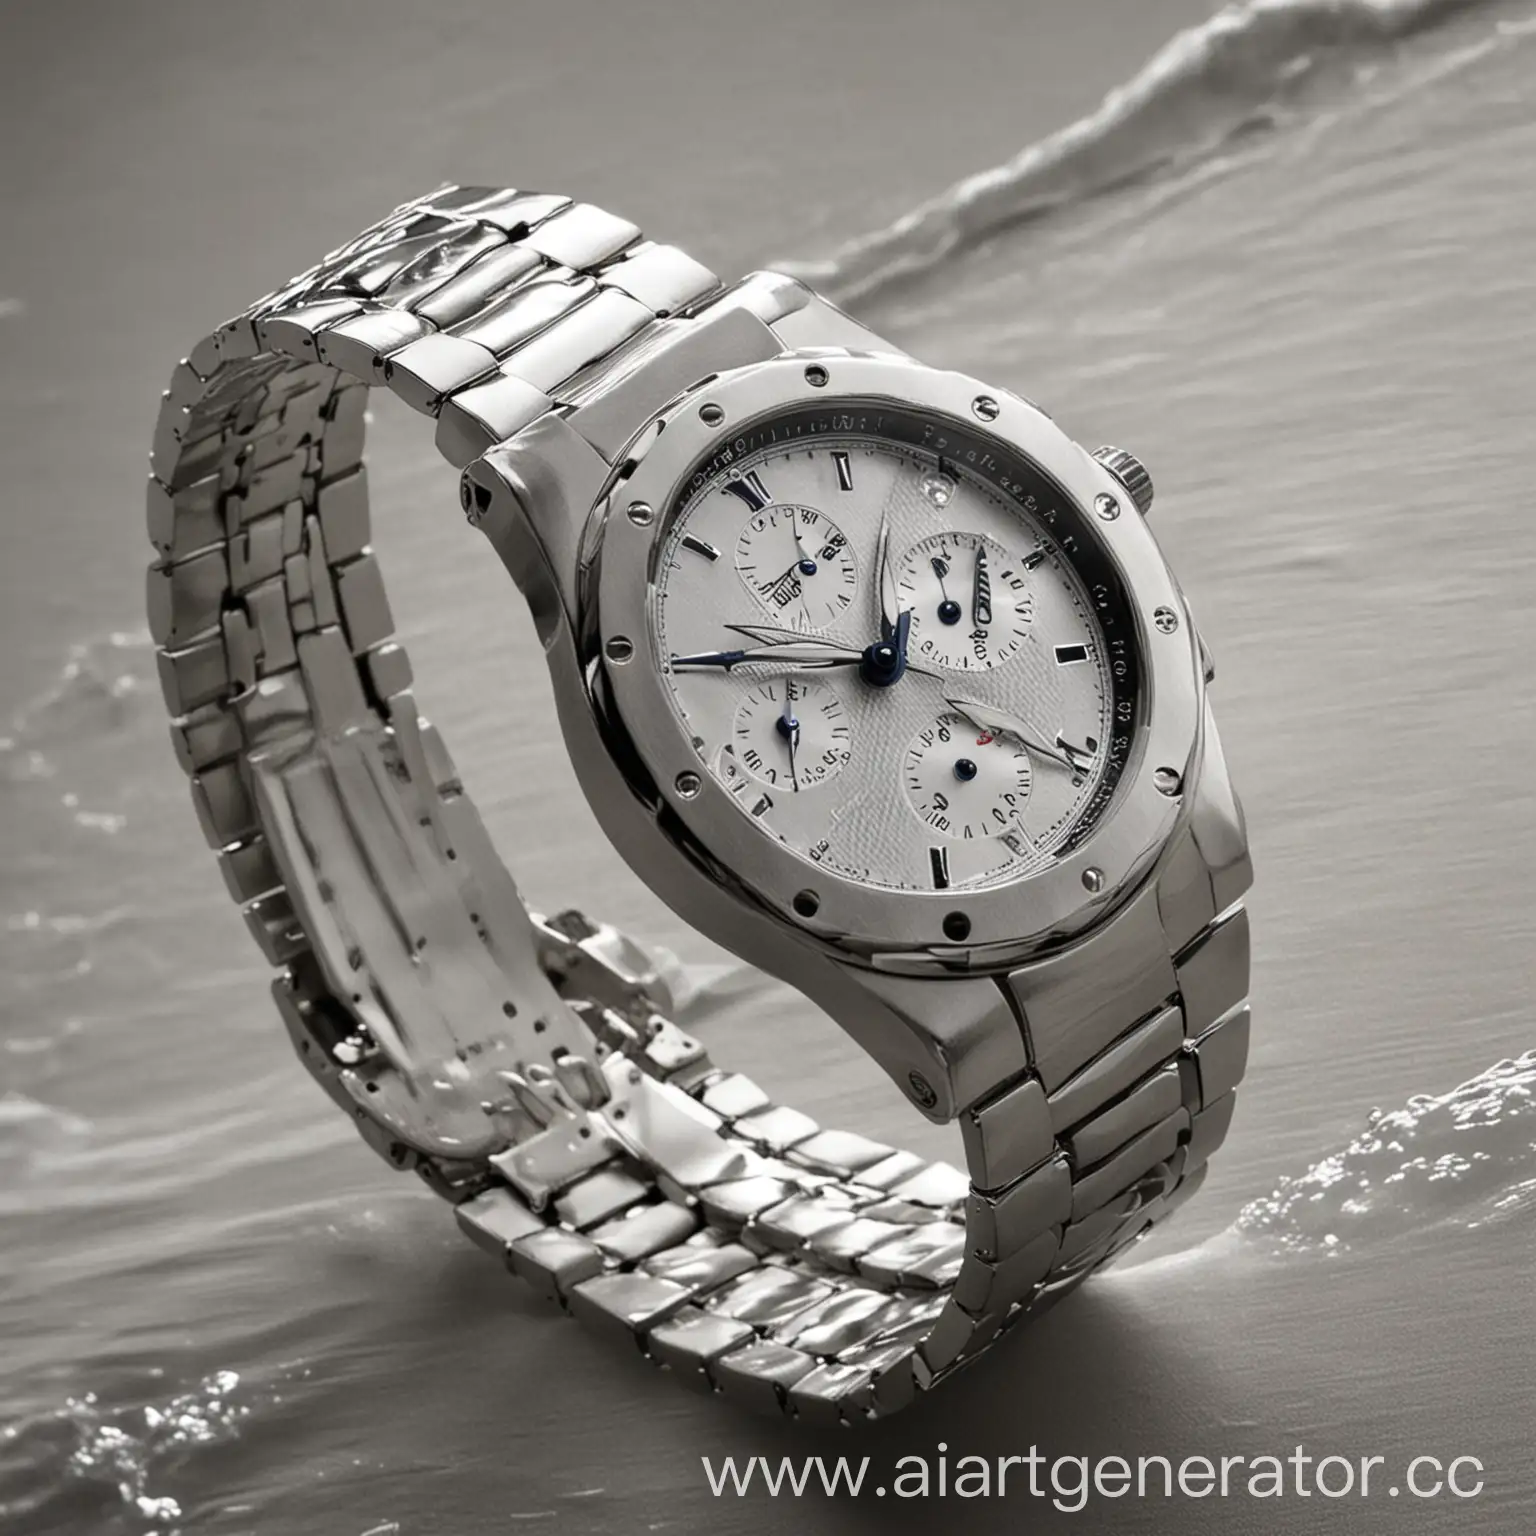 Transformation-of-Silver-Wrist-Watches-into-Vibrant-Energy-Waves